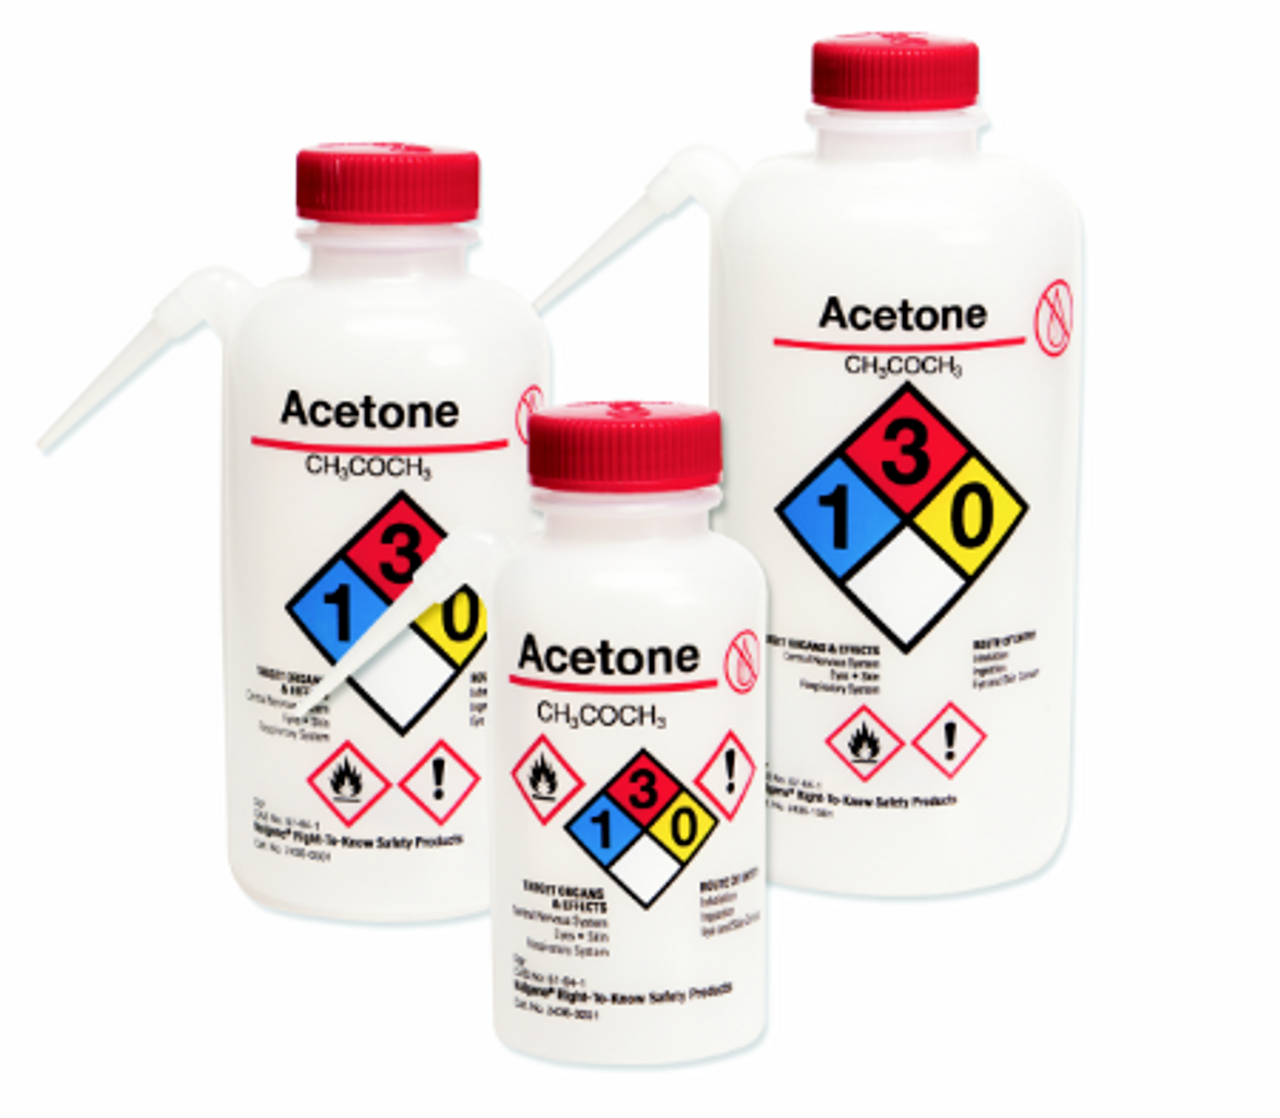 HPLC Grade Acetone, 1 Gal. jug for sale from The Science Company.